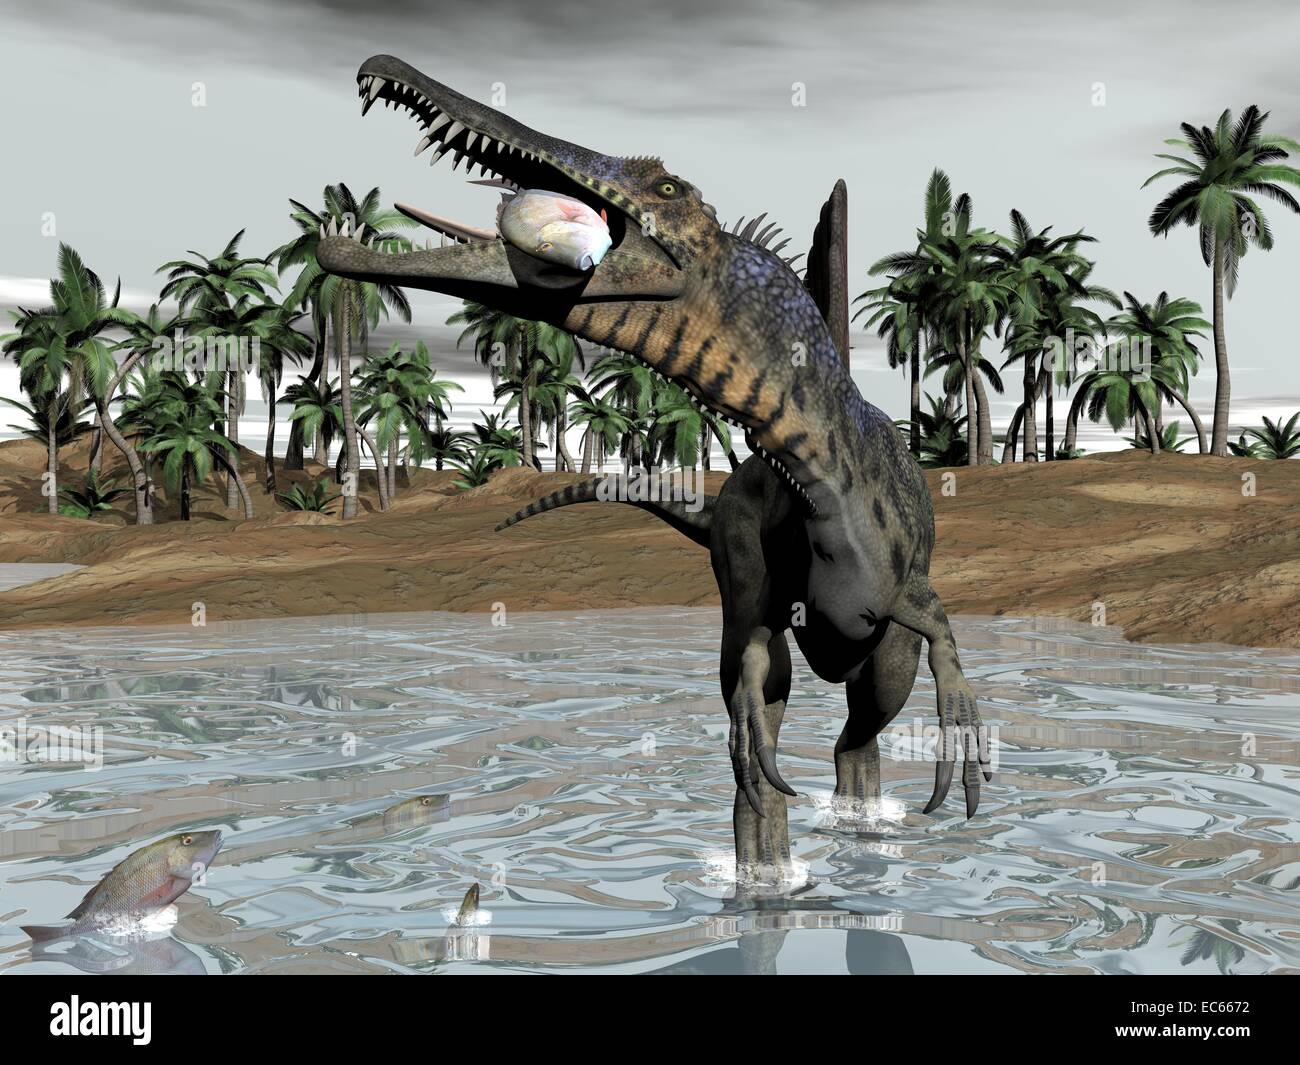 One spinosaurus dinosaur walking in water and eating fish by cloudy day Stock Photo